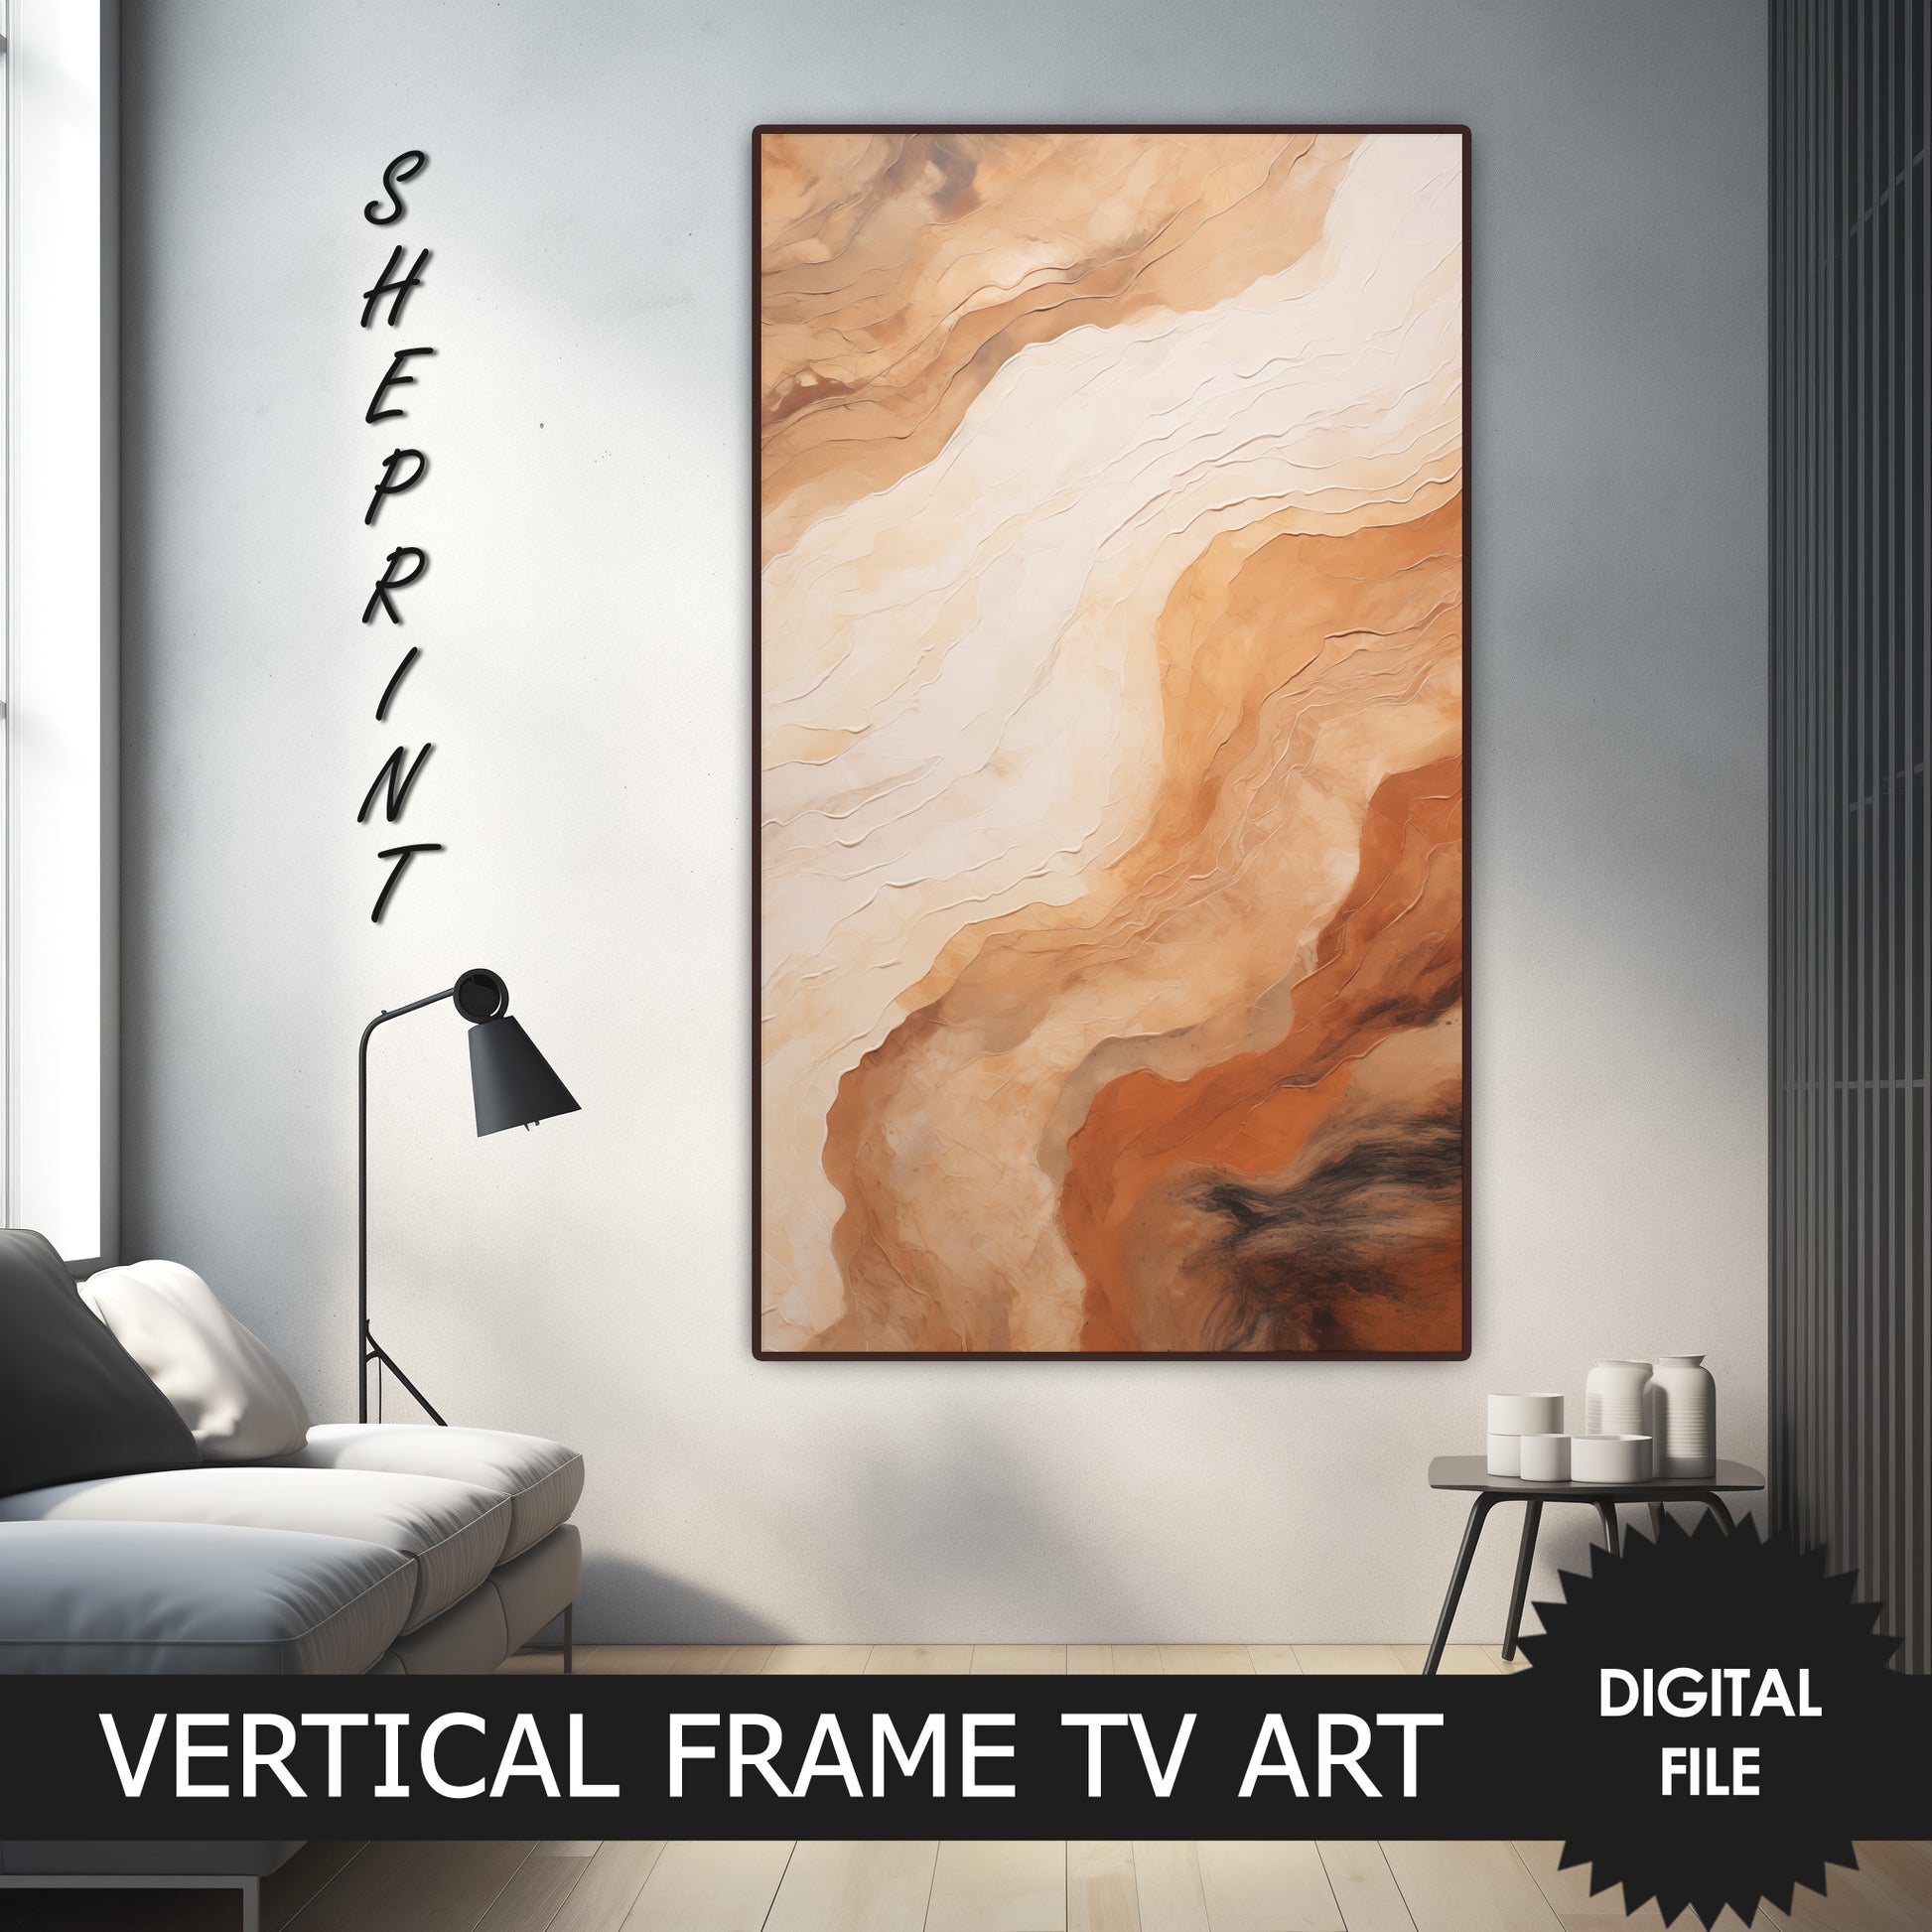 Vertical Frame TV Art, Earthy Tones Waves Abstract Art preview on Samsung Frame TV when mounted vertically